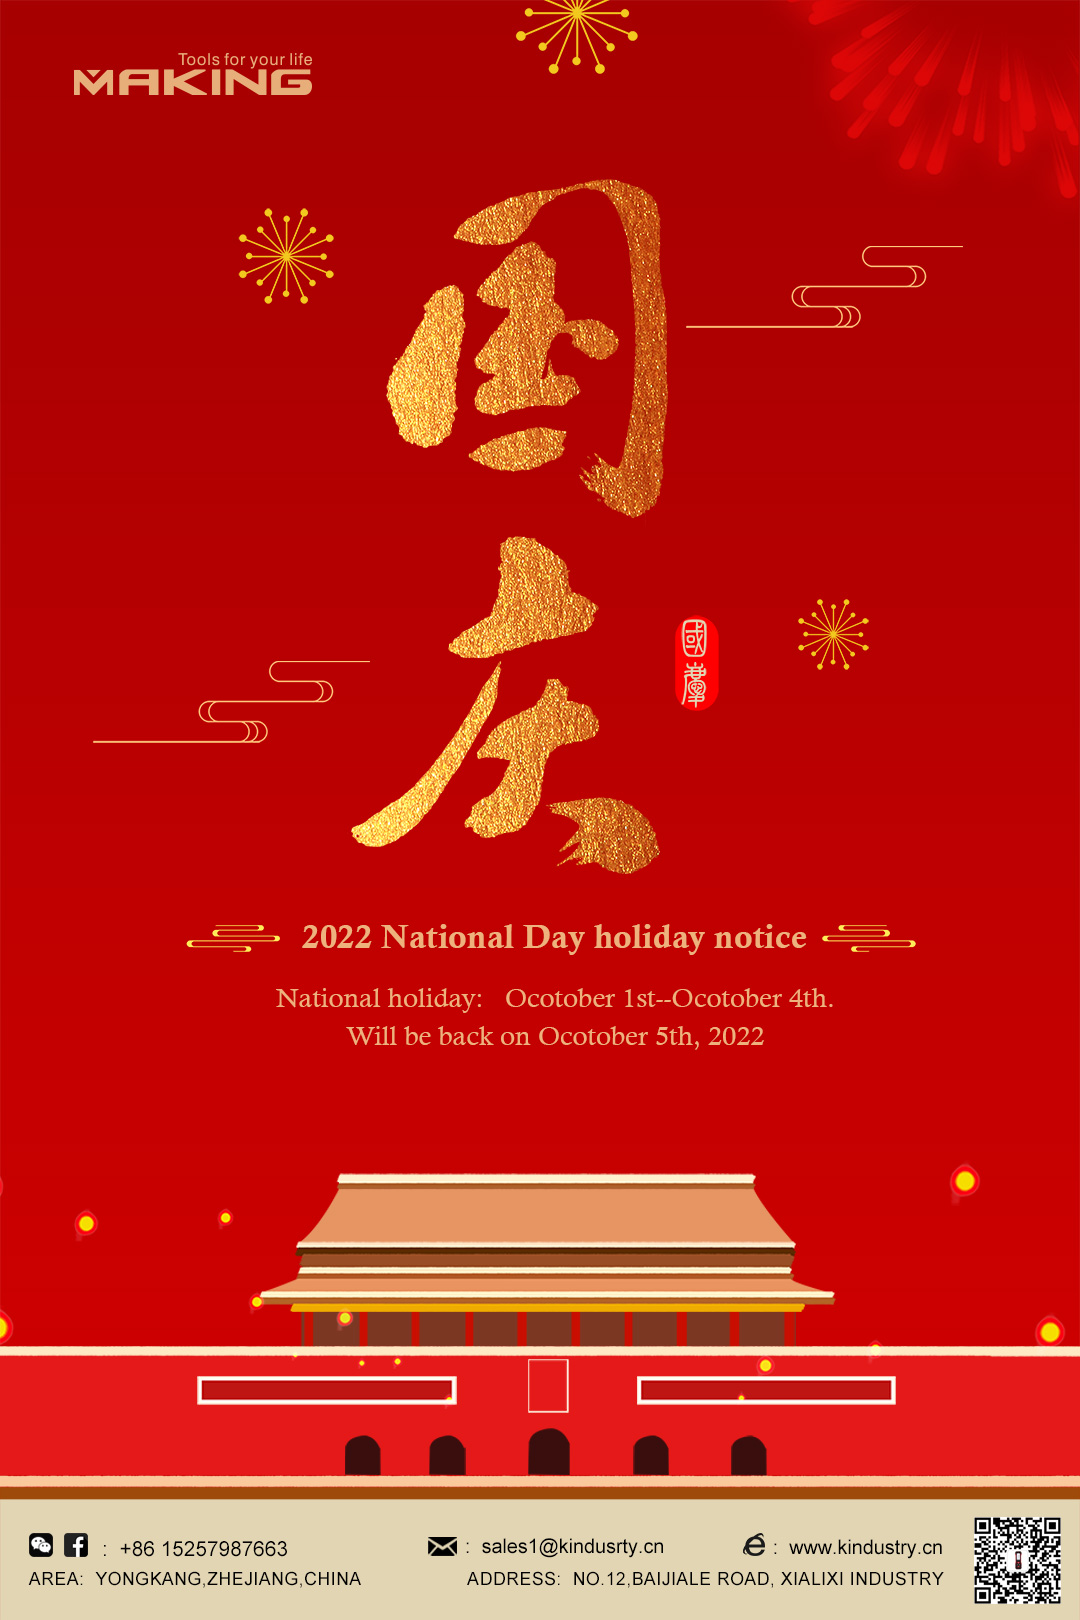 The National Day Holiday notice